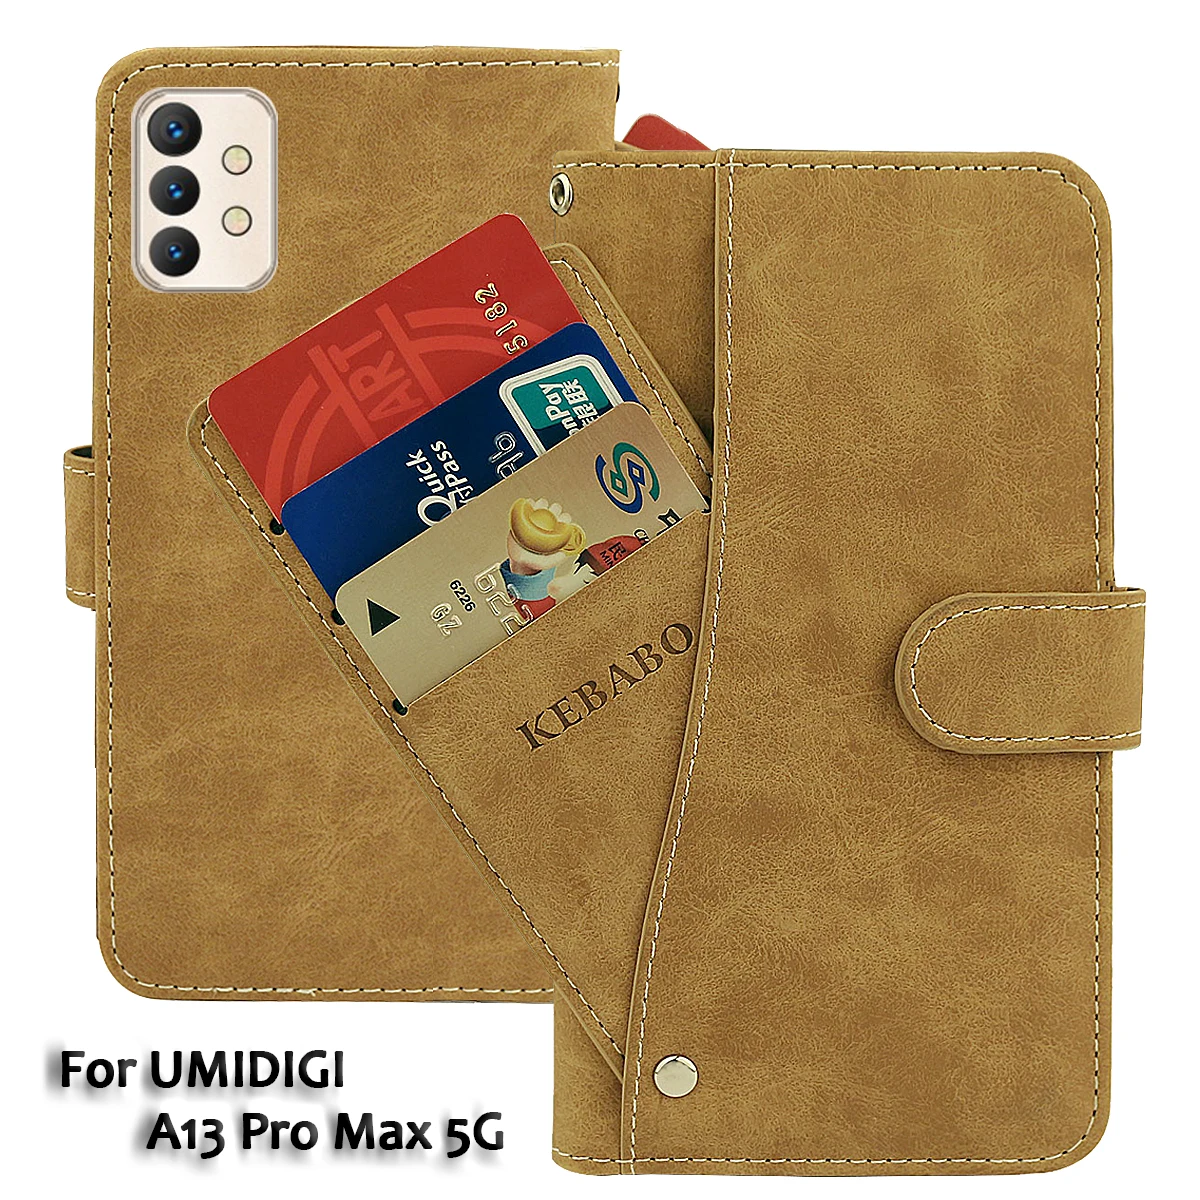 

Vintage Leather Wallet UMIDIGI A13 Pro Max 5G Case 6.8" Flip Luxury Card Slots Cover Magnet Phone Protective Cases Bags